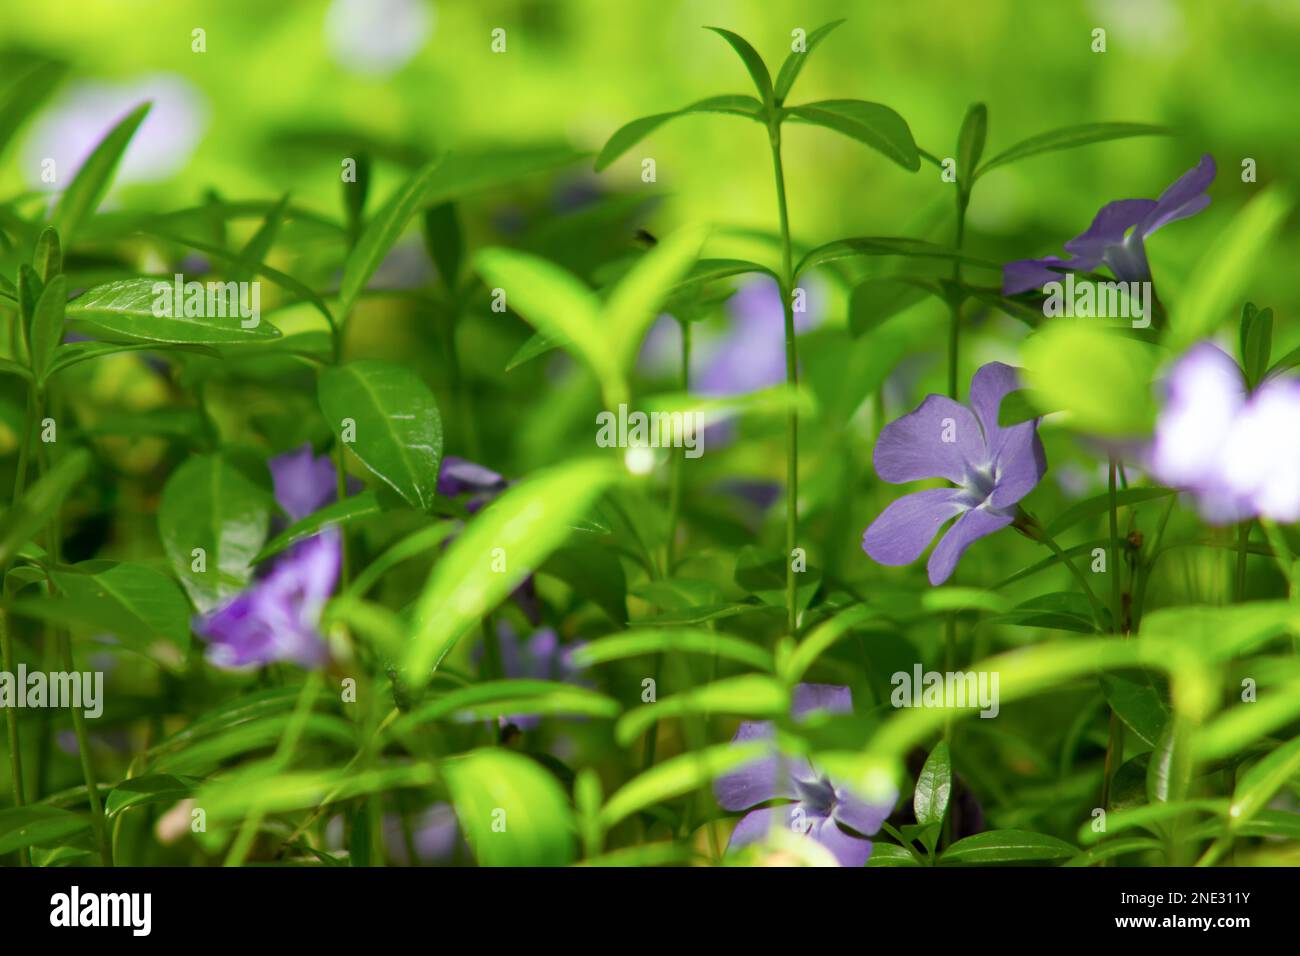 Purple periwinkle, selective focus through green leaves close-up. Stock Photo